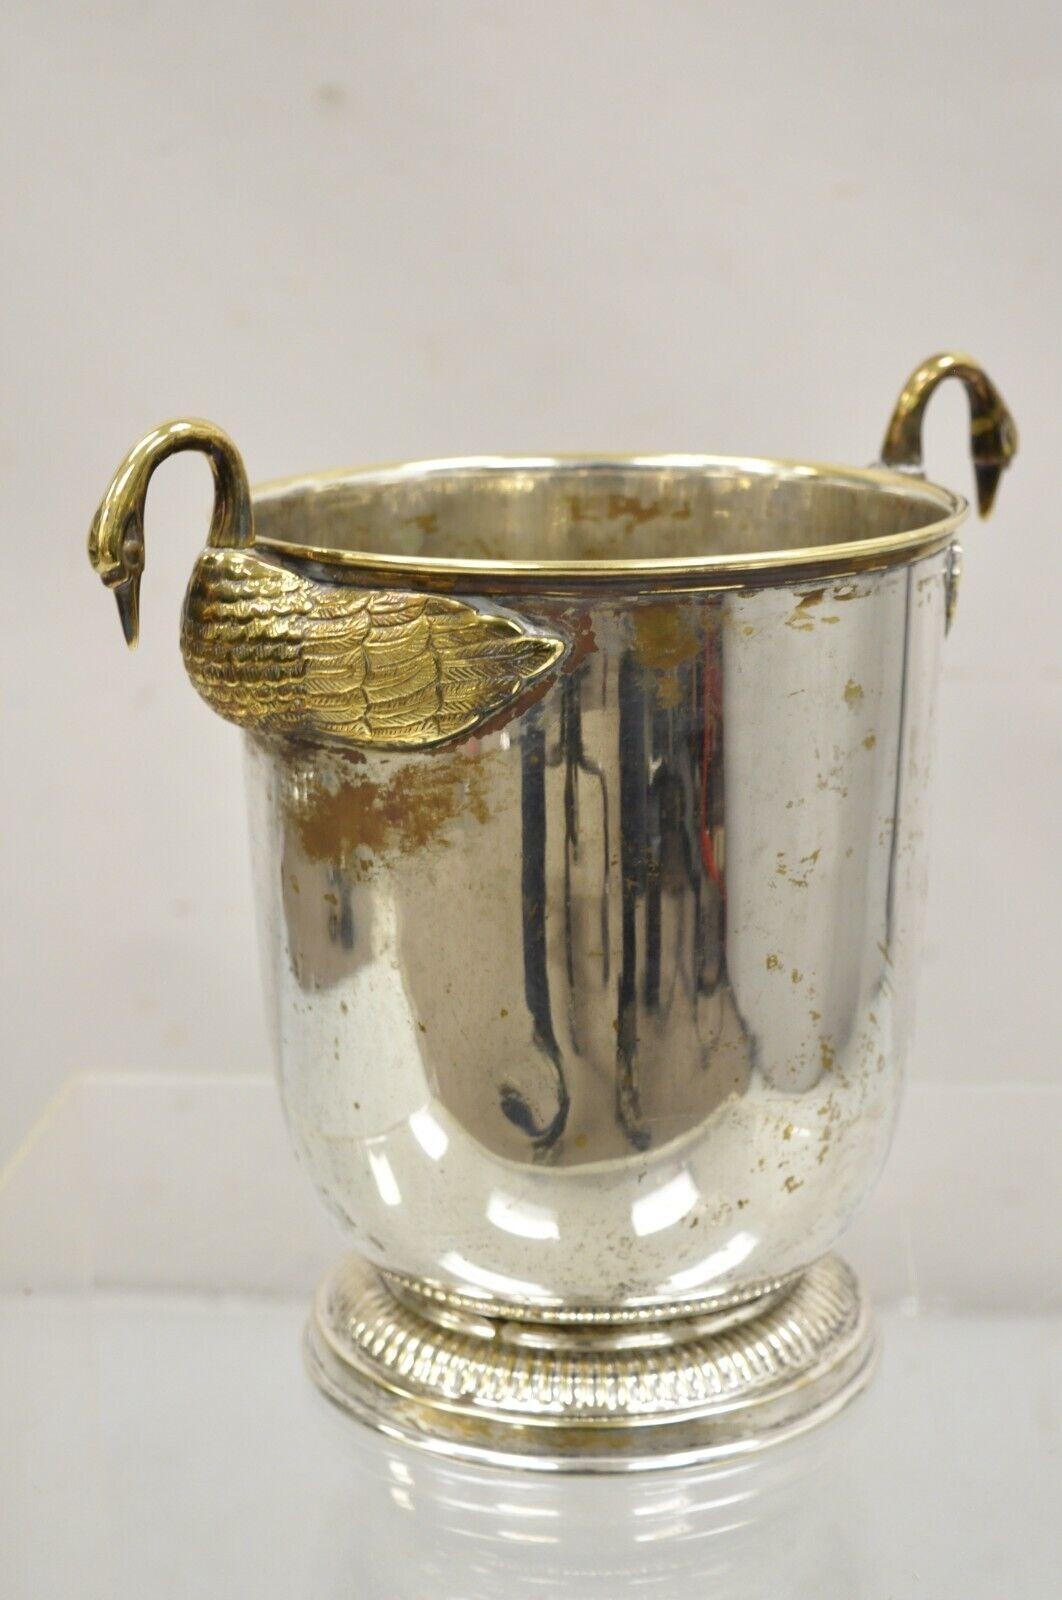 Vintage Italian Regency Silver Plated Champagne Chiller Ice Bucket with Brass Swans. Circa Mid 20th Century. Measurements: 10